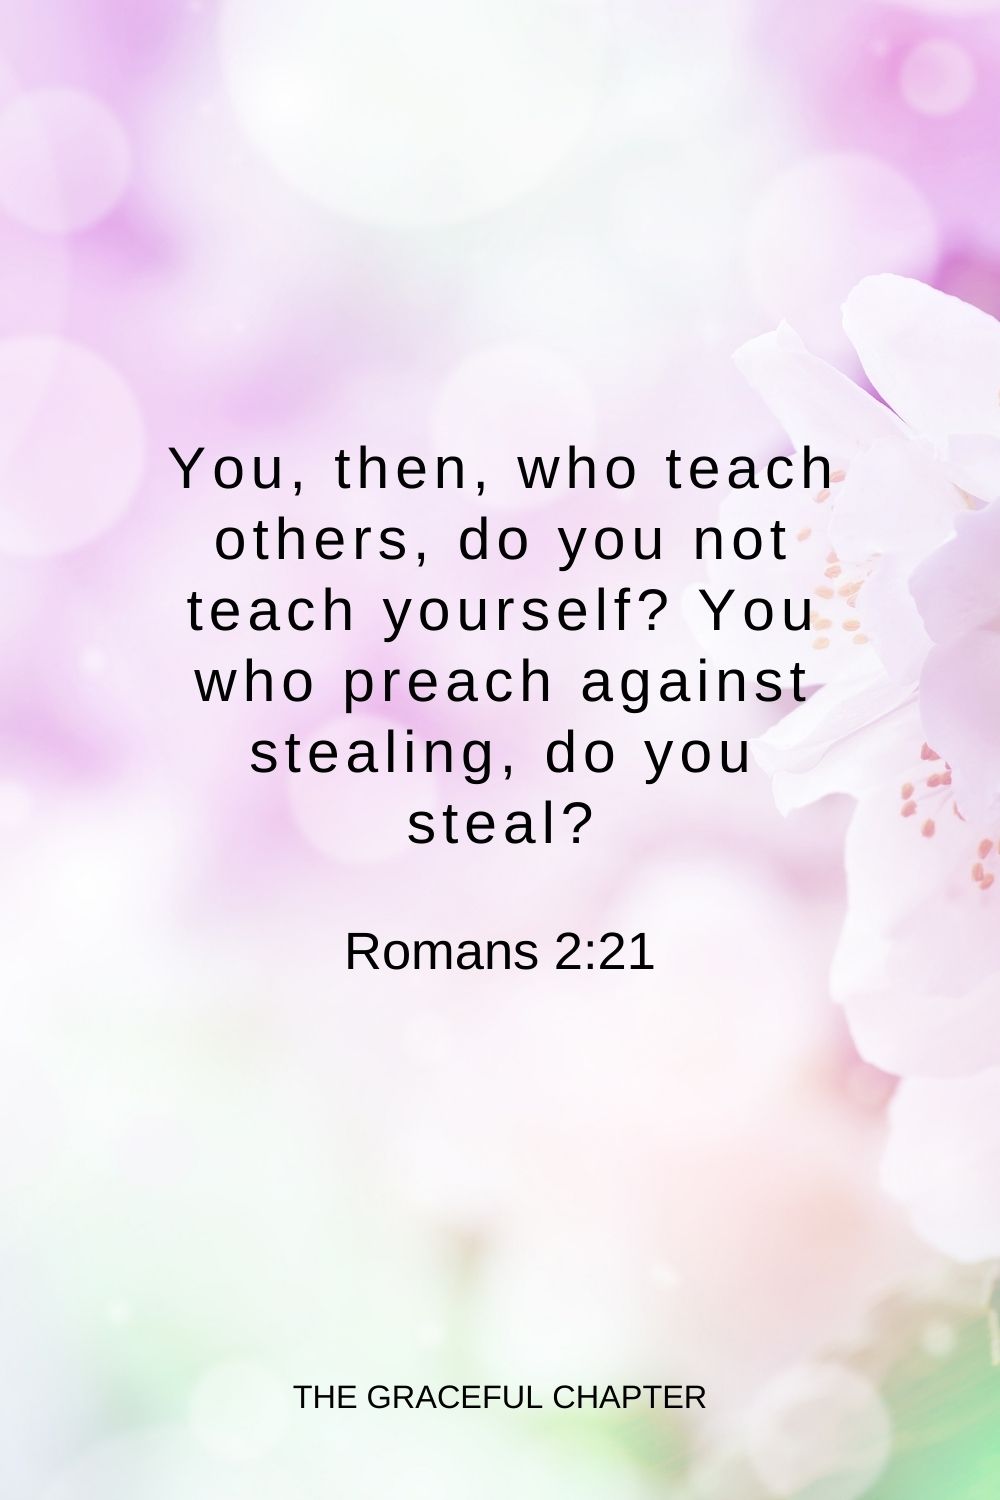 You, then, who teach others, do you not teach yourself? You who preach against stealing, do you steal? Romans 2:21